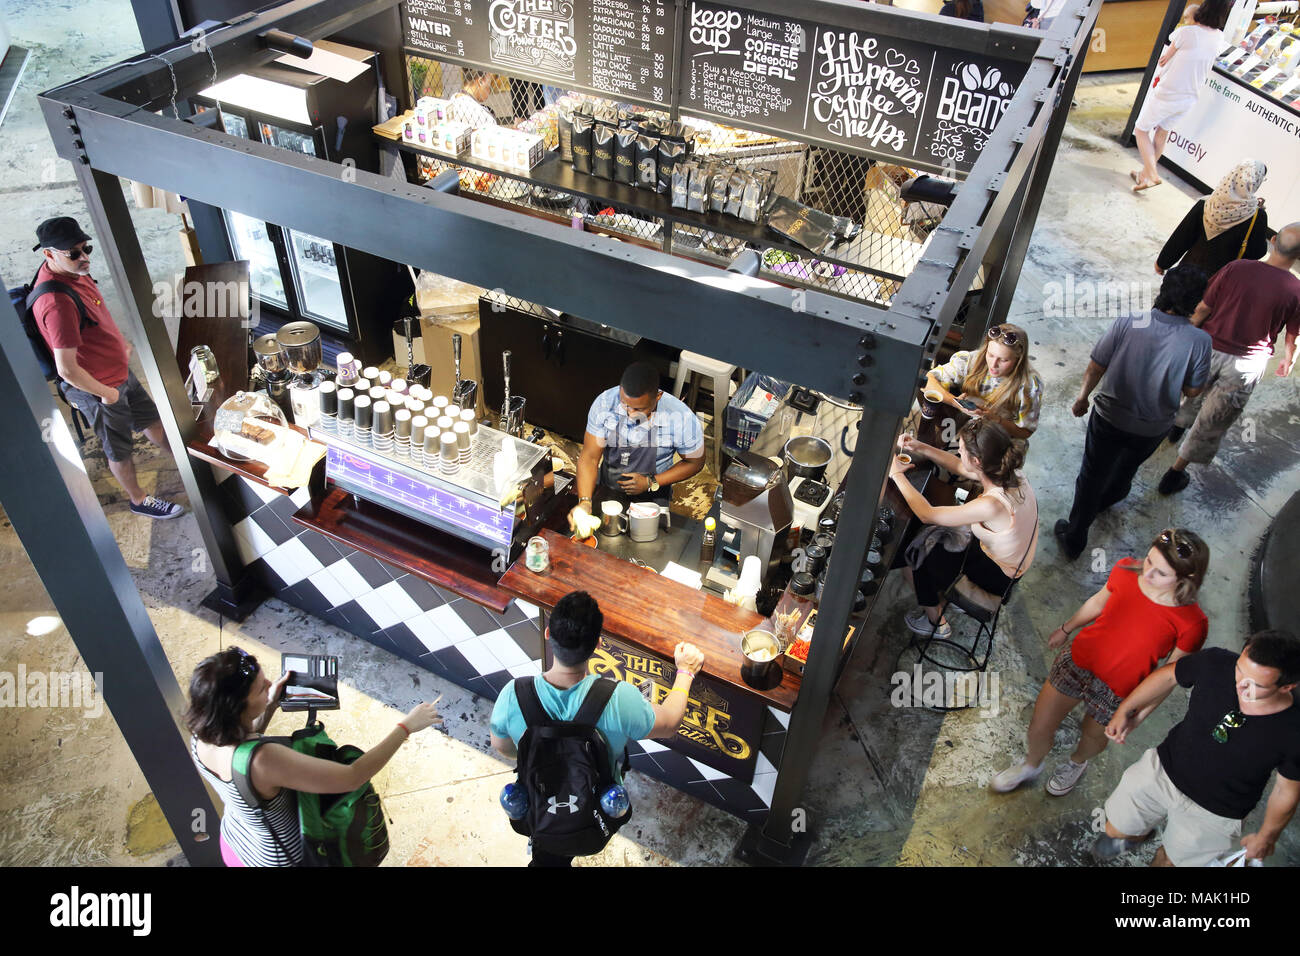 Artisan coffee stall inside the V&A Food Market, on the Waterfront, with local gourmet goods and international street food, in Cape Town, South Africa Stock Photo